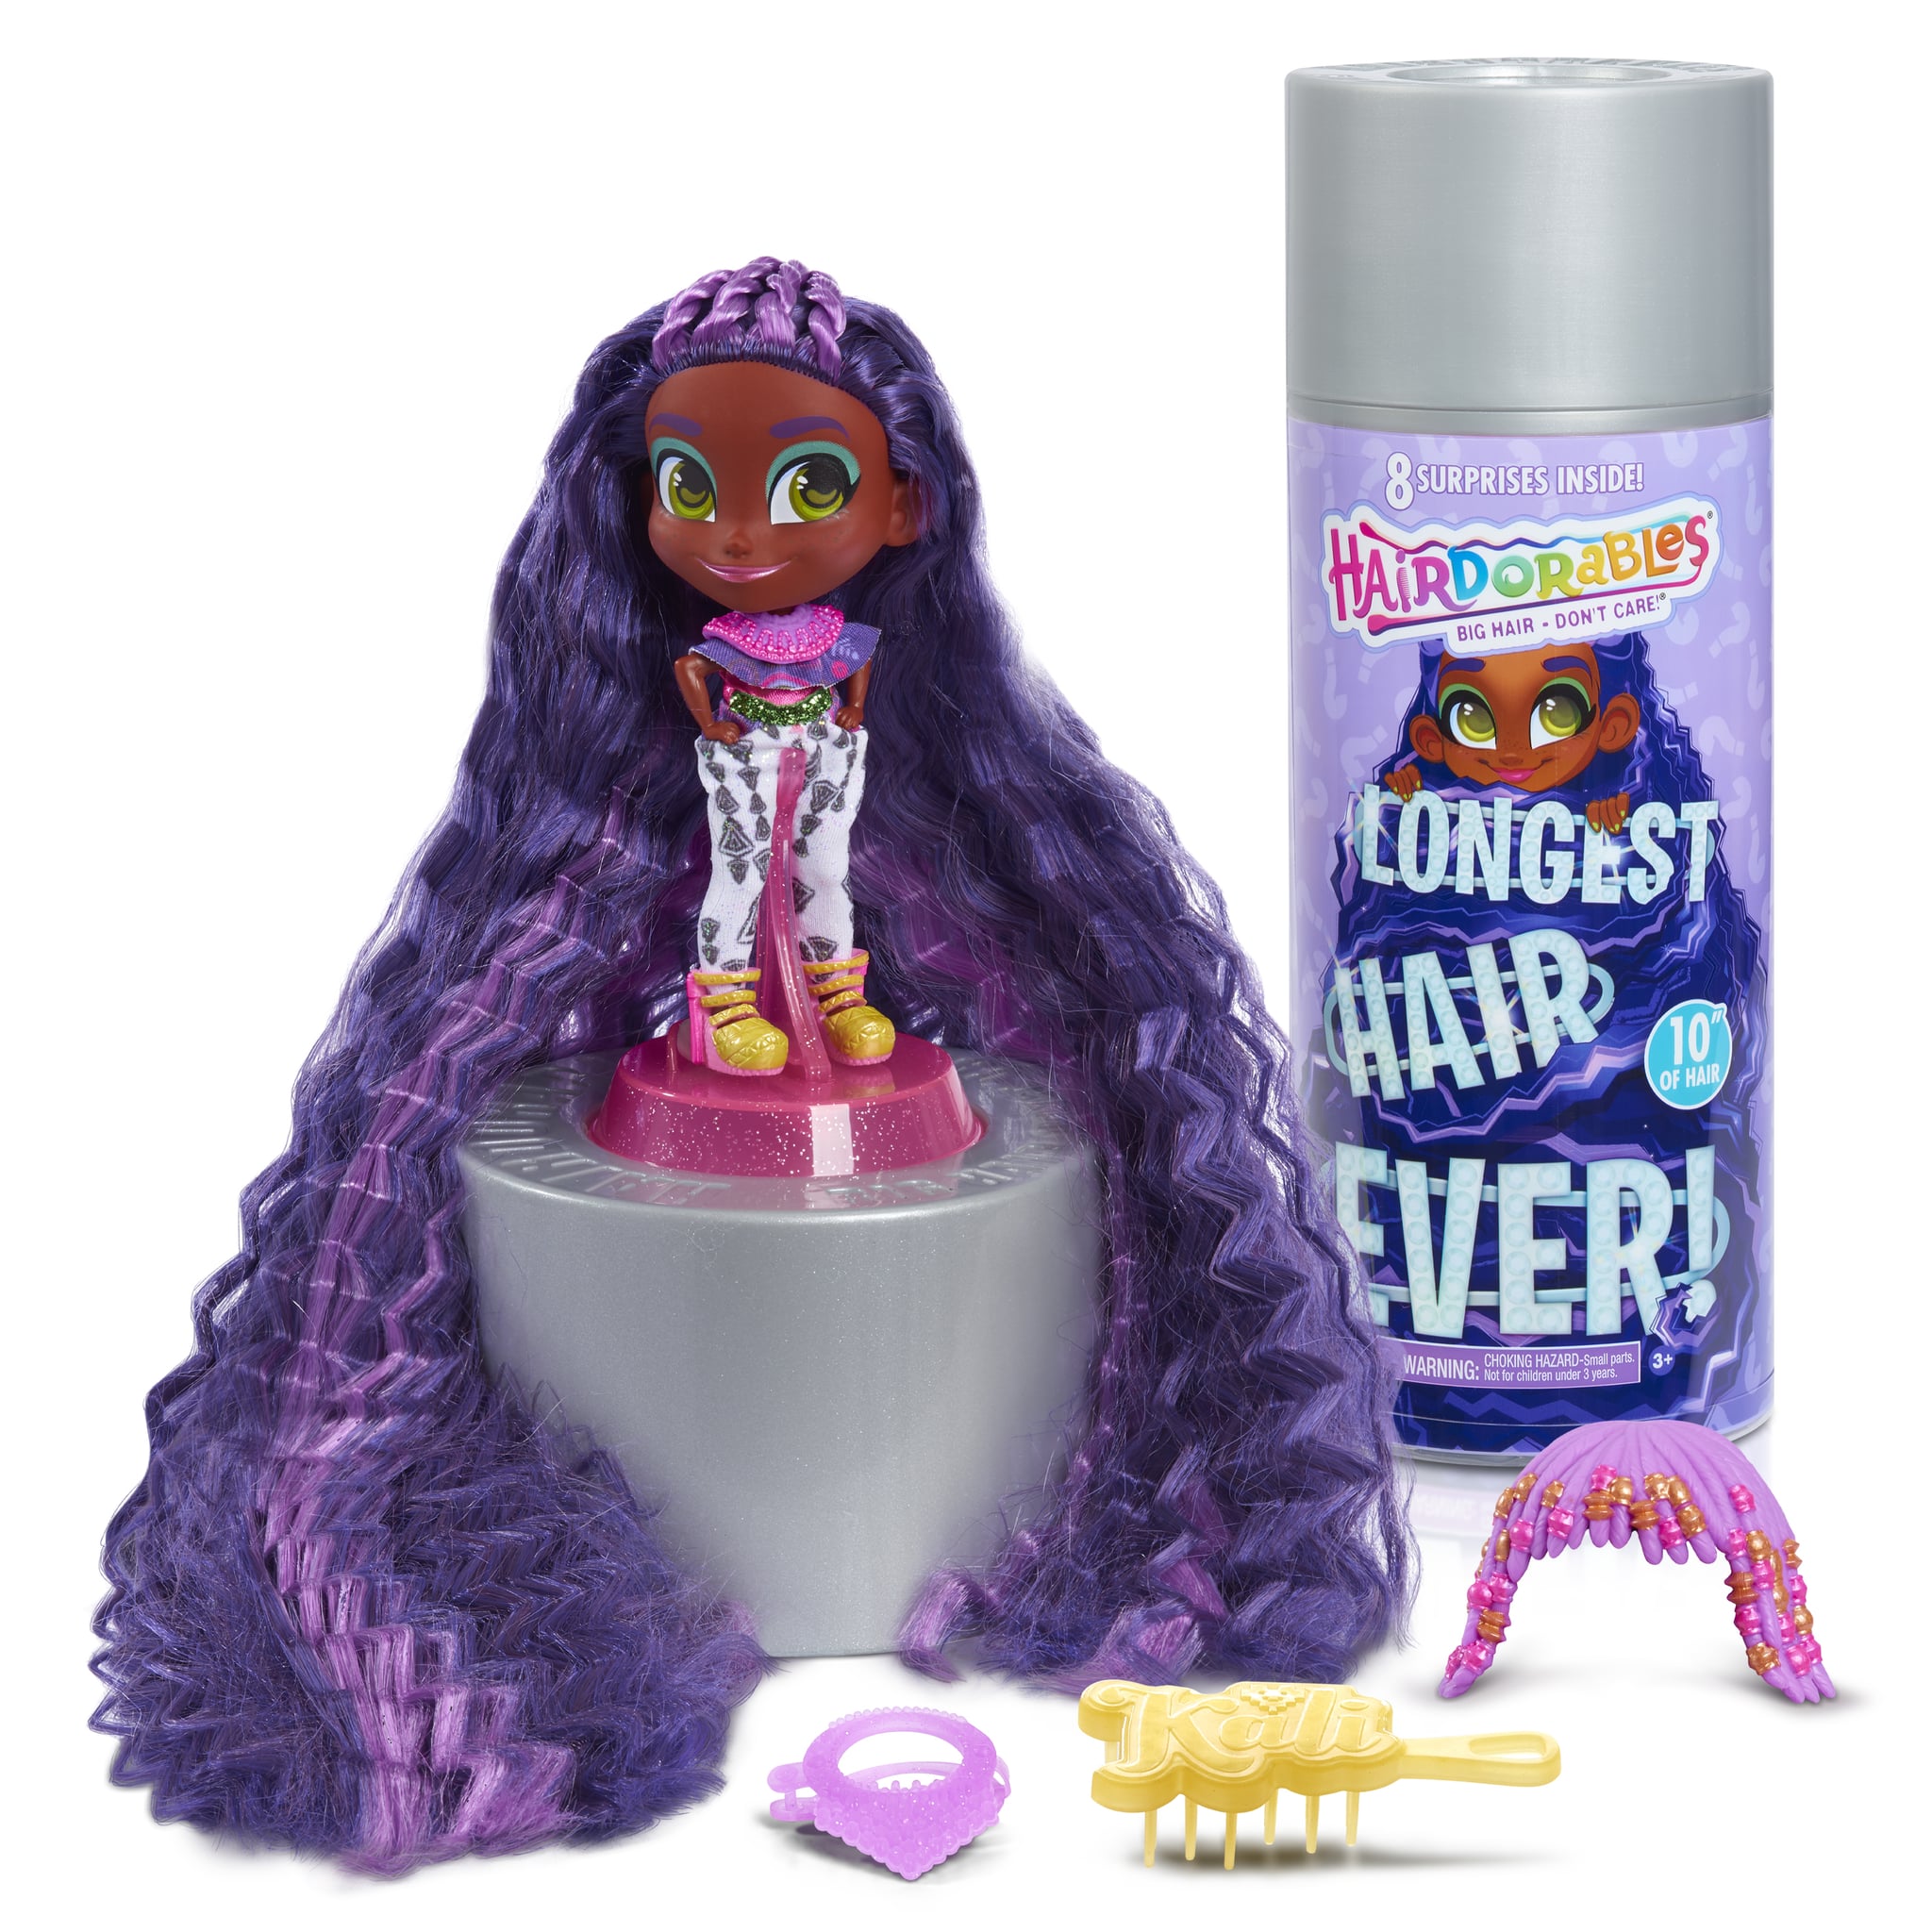 Hairdorables Longest Hair Ever Doll | 180+ Brand-New Toys of 2020 That Will  Make Great Gifts For Kids of All Ages | POPSUGAR Family Photo 135